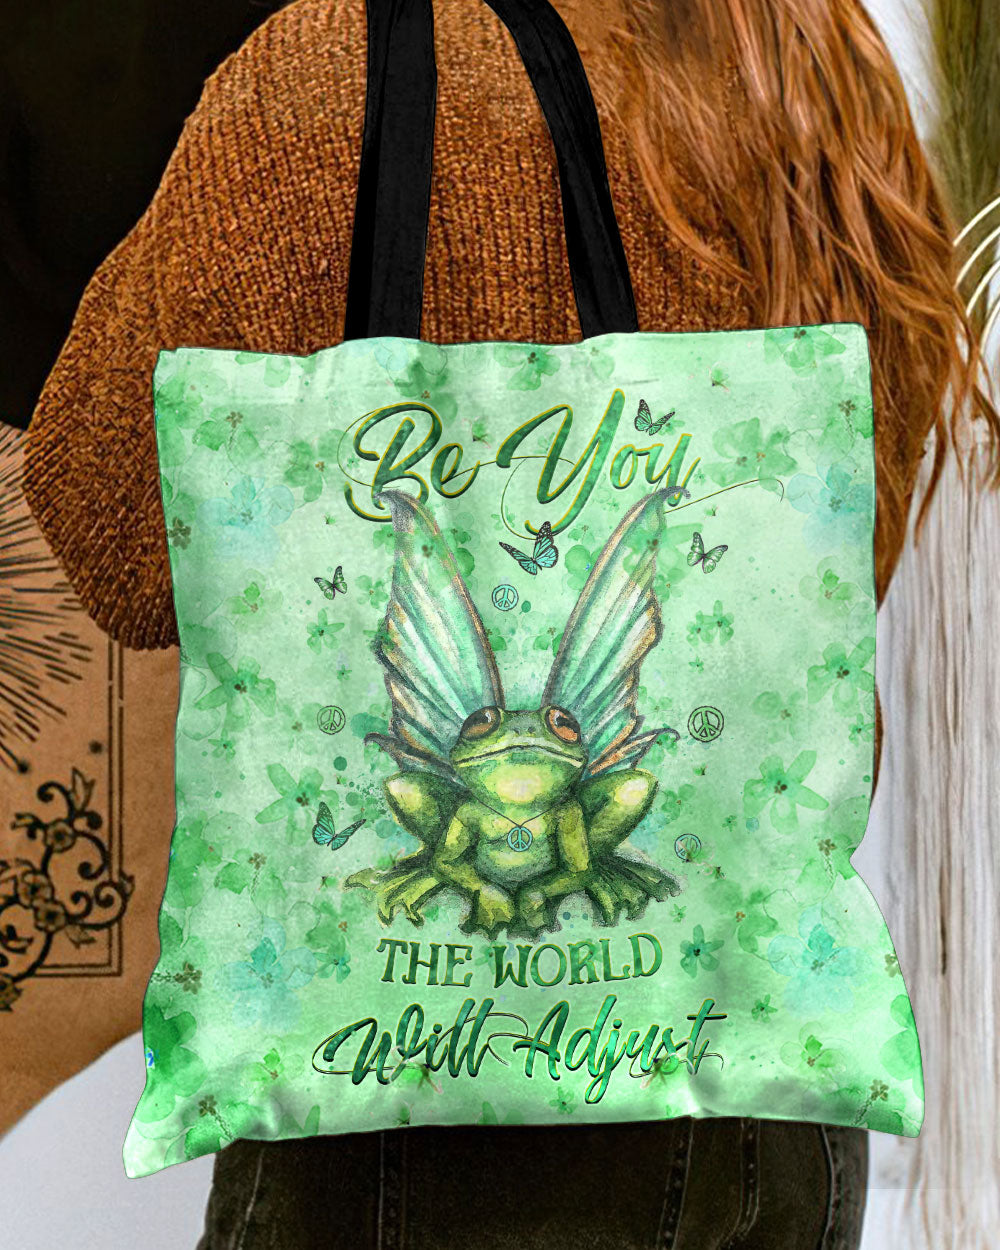 BE YOU THE WORLD WILL ADJUST TOTE BAG - YHHG2208235